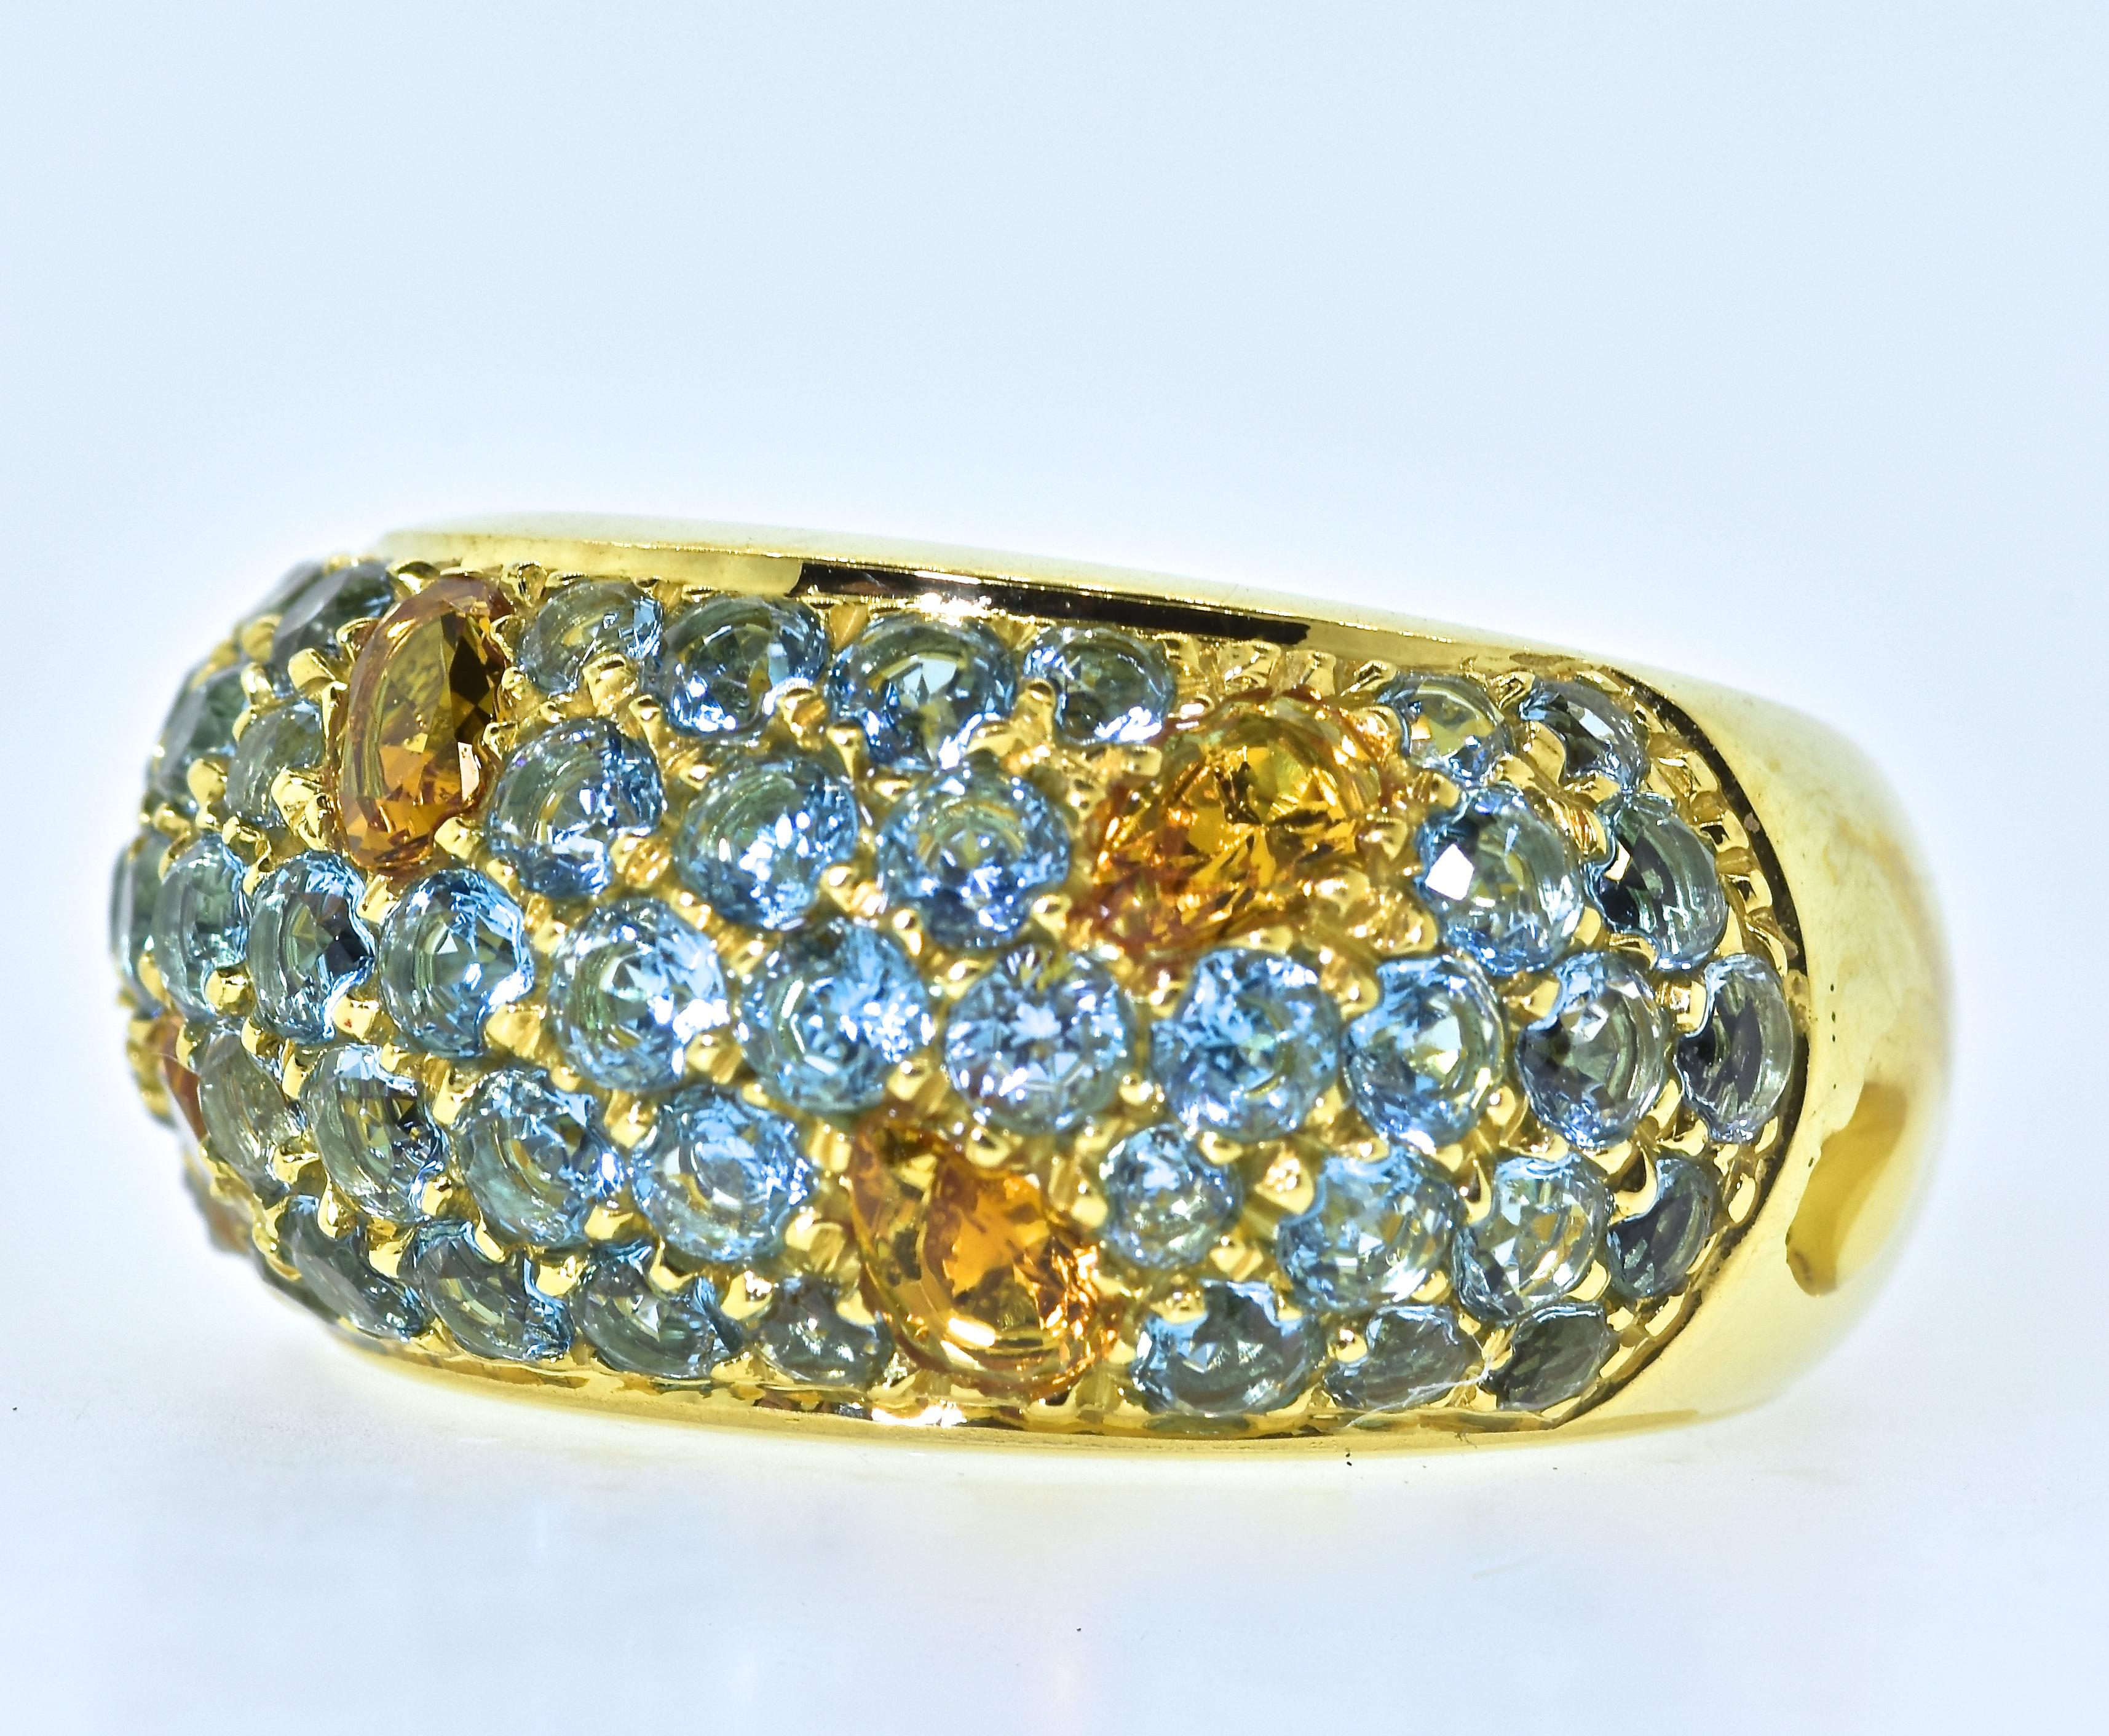 Brilliant Cut 18k Yellow Gold Ring with Citrine and Blue Topaz